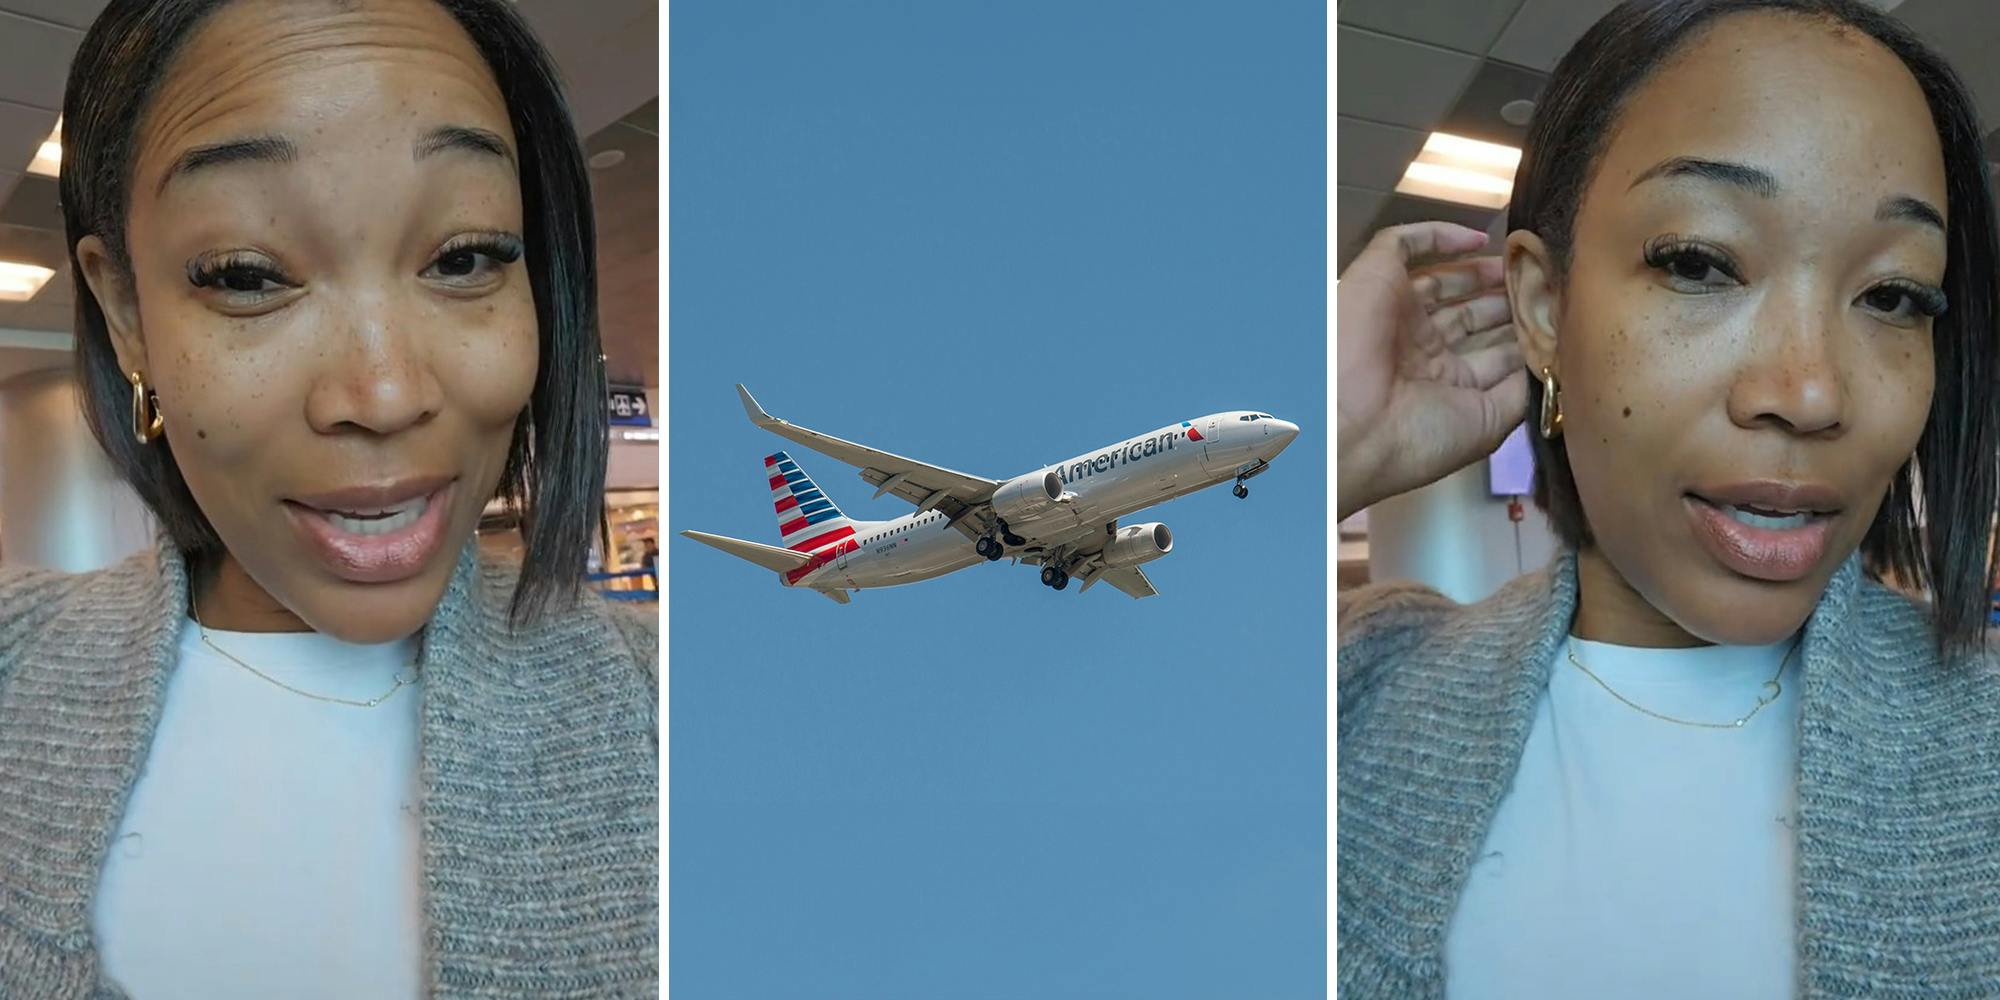 ‘Booking EXIT row seats going forward’: American Airlines passenger says she received this unexpected perk while sitting in exit row